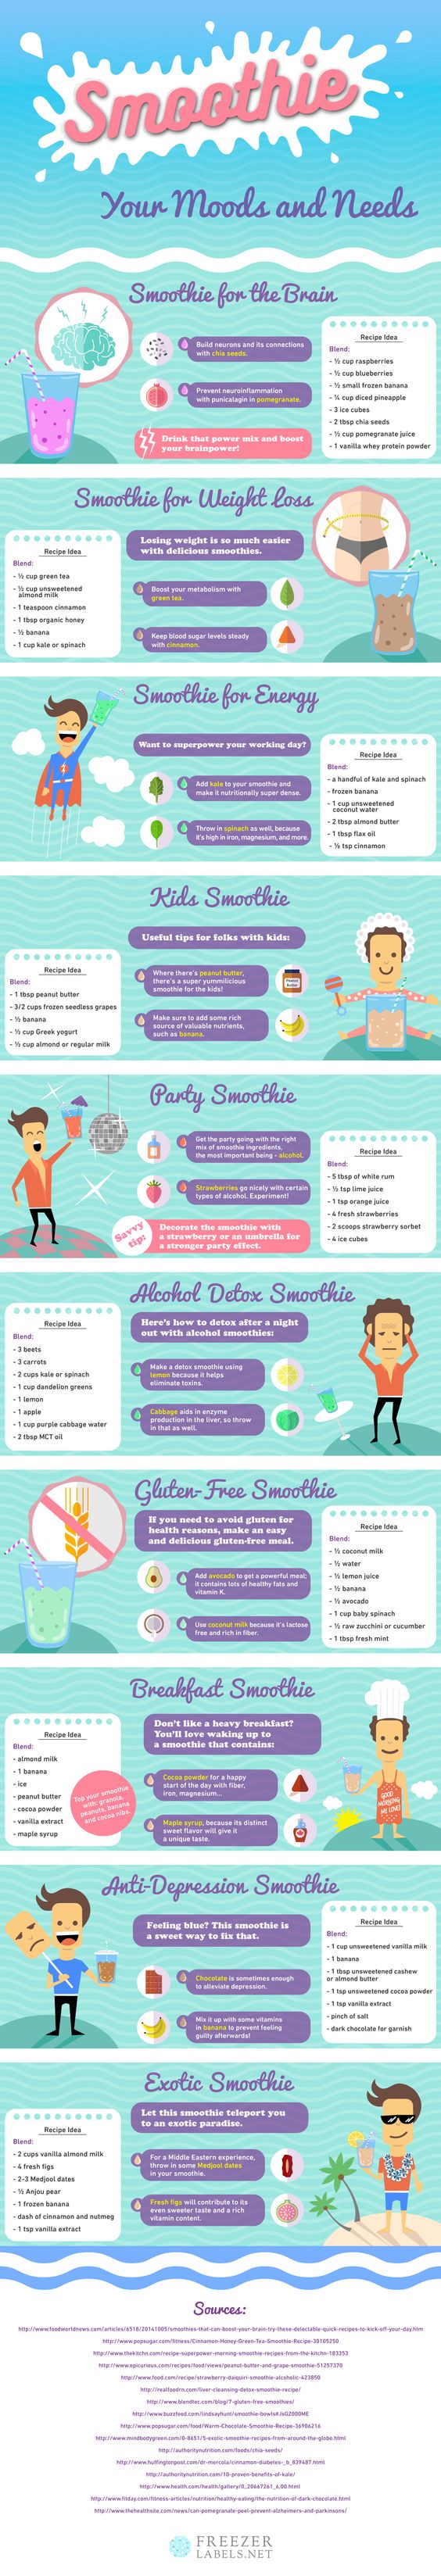 16 Healthy Smoothie Infographics That Will Help You Lose Weight Fast ...